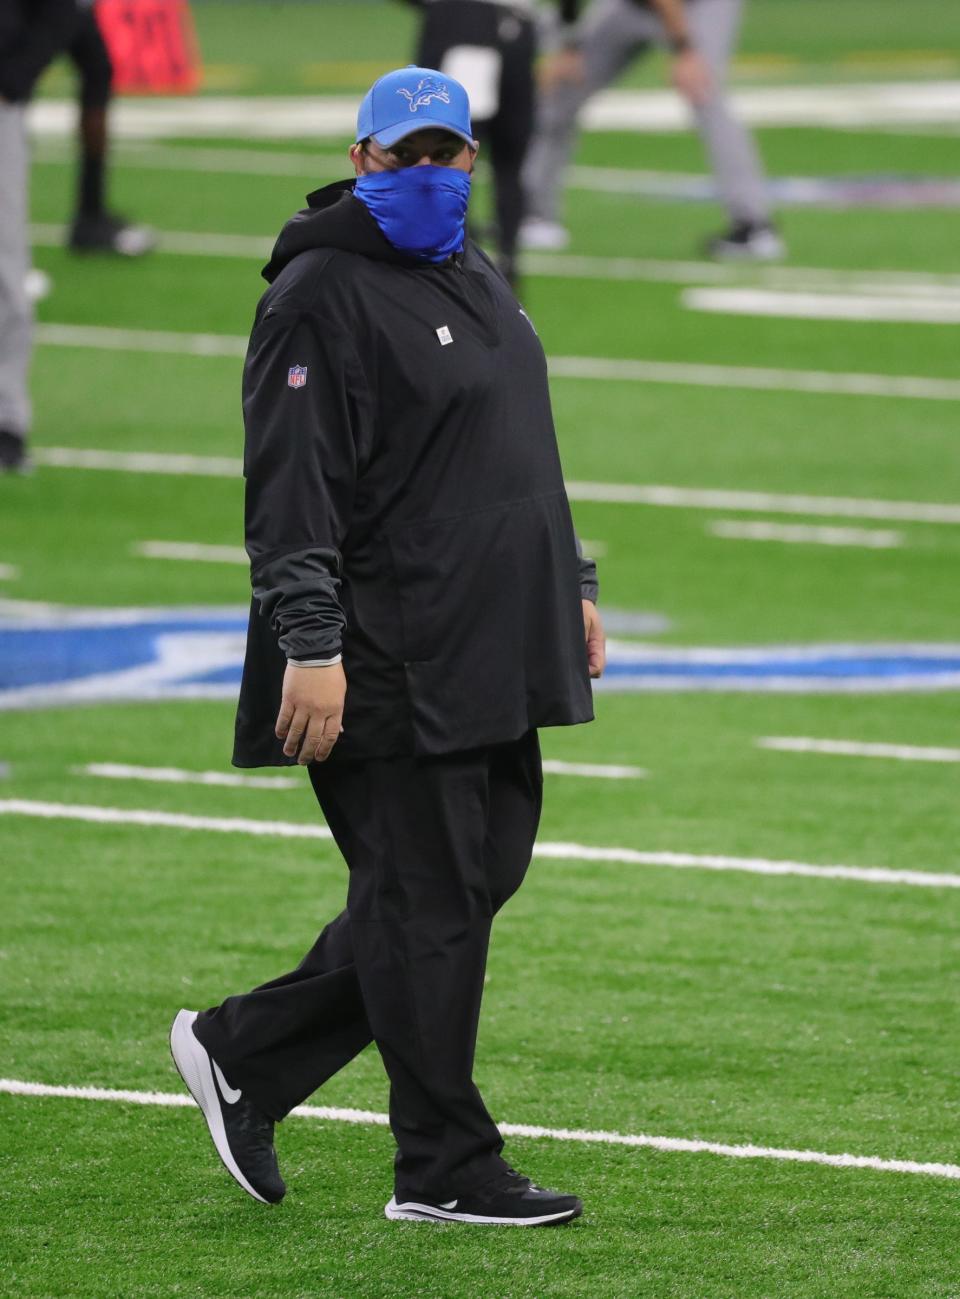 Lions coach Matt Patricia watches from the field before the game against the Saints on Sunday, Oct. 4, 2020, at Ford Field.